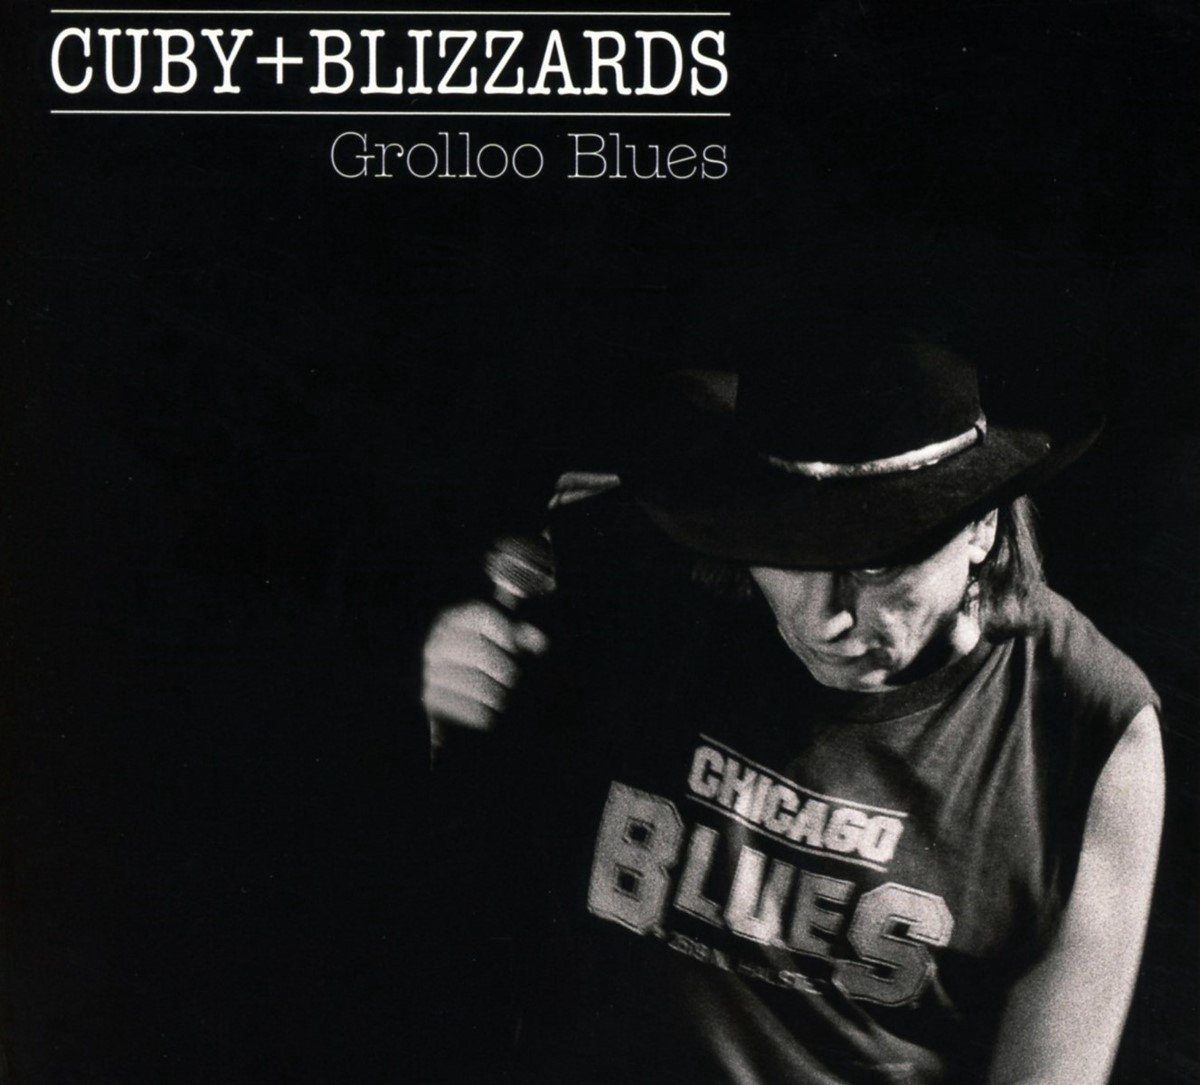 Cuby & The Blizzards - Grolloo Blues (2 CD) - Cuby + Blizzards